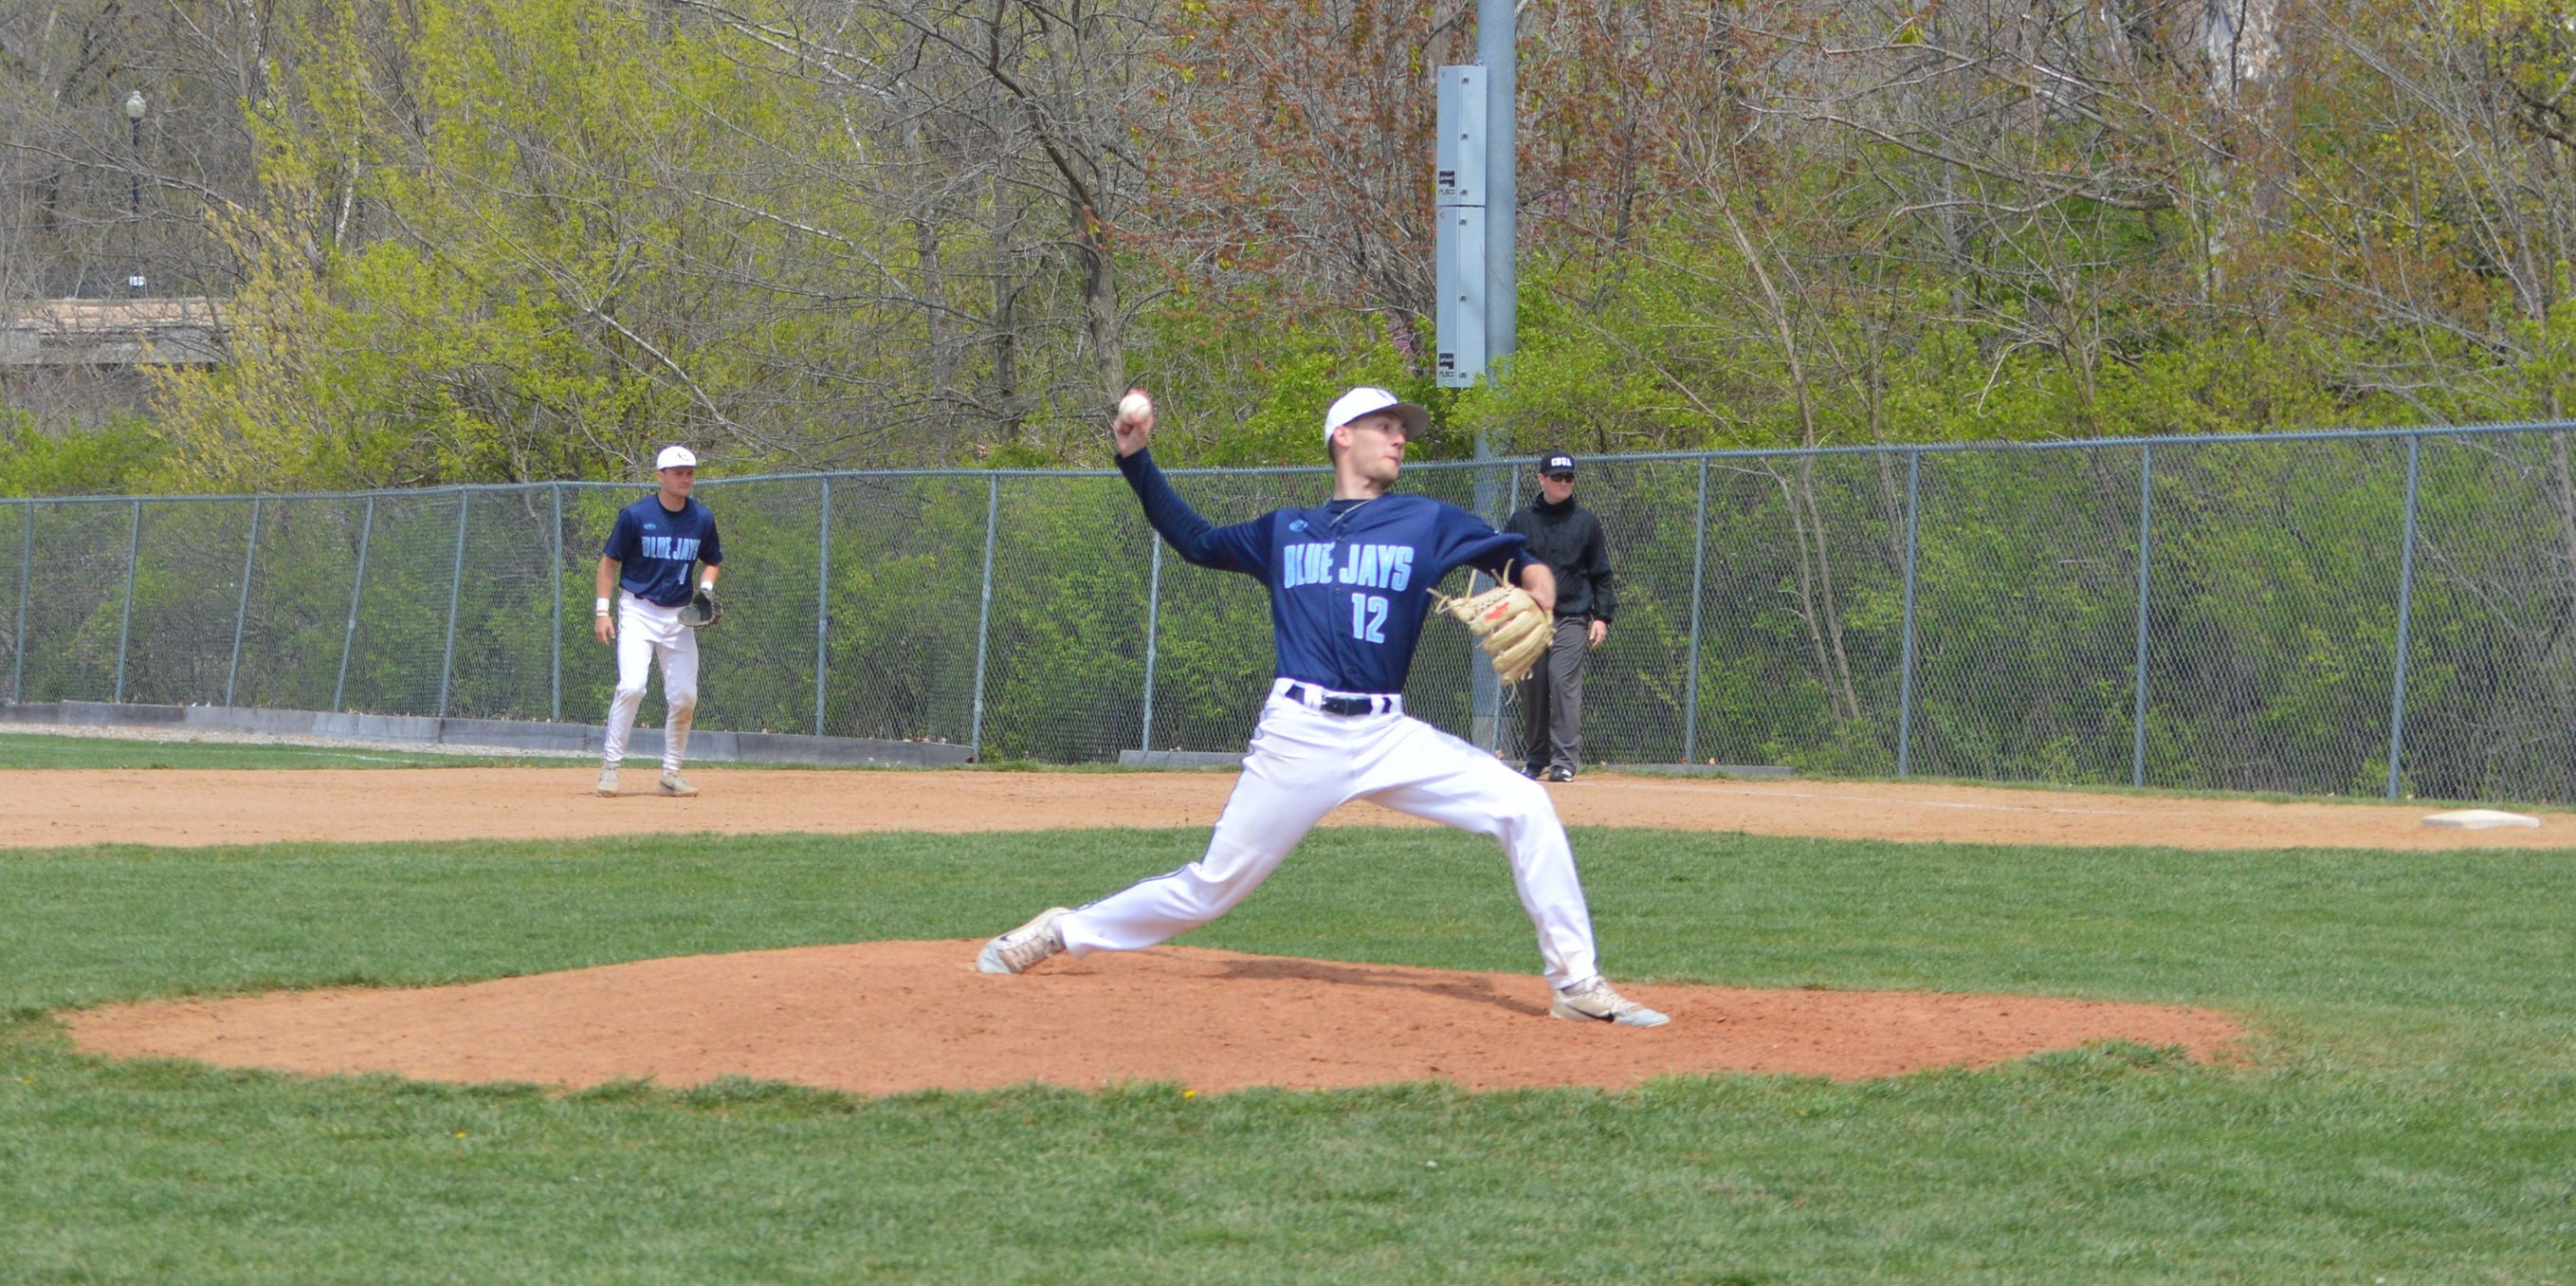 Drew Boessen pitched seven innings of no-hit baseball to lead the Blue Jays to a win in game one of their series with Greenville University Friday.